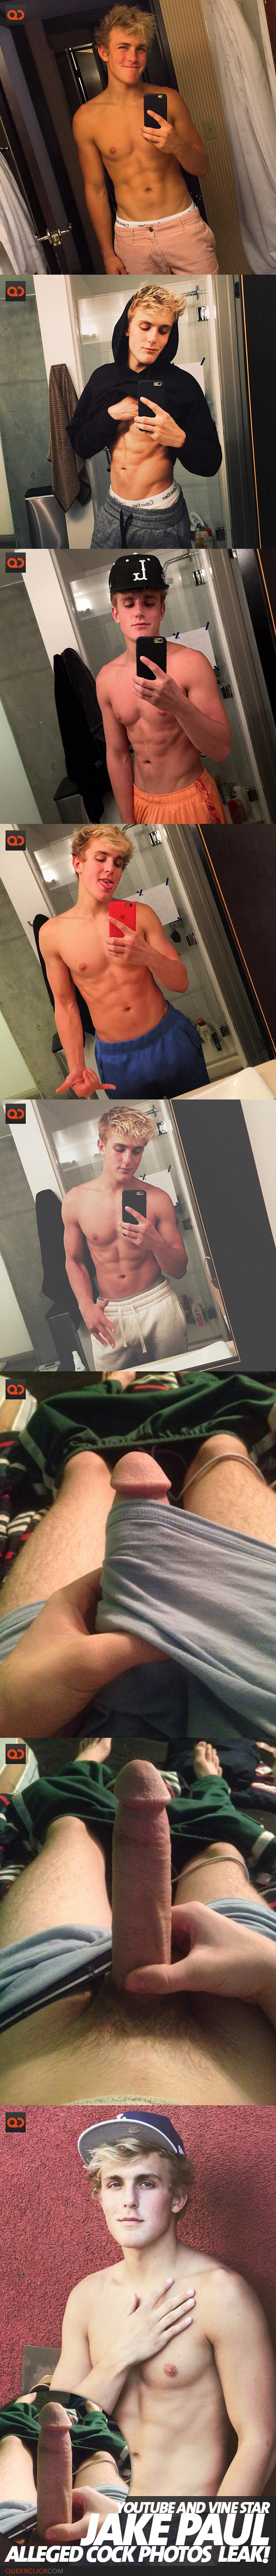 Jake Paul, YouTube and Vine Star, Alleged Cock Photos Leak!